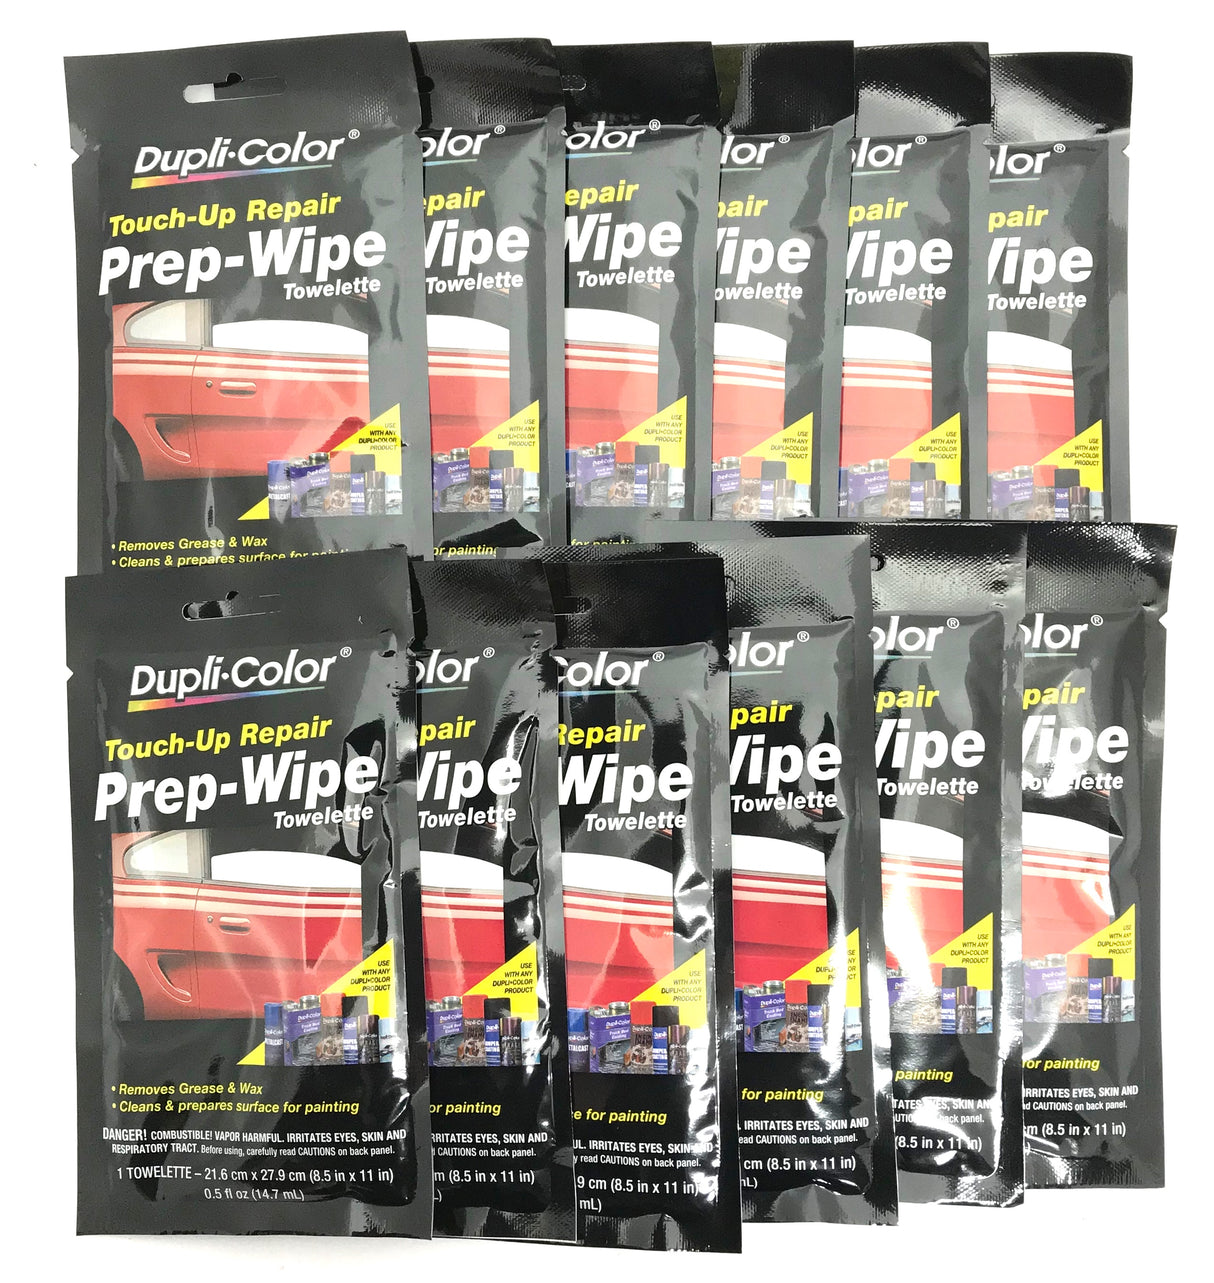 Duplicolor PW100-12 Pack Touch-up Repair Prep-Wipe Towelette